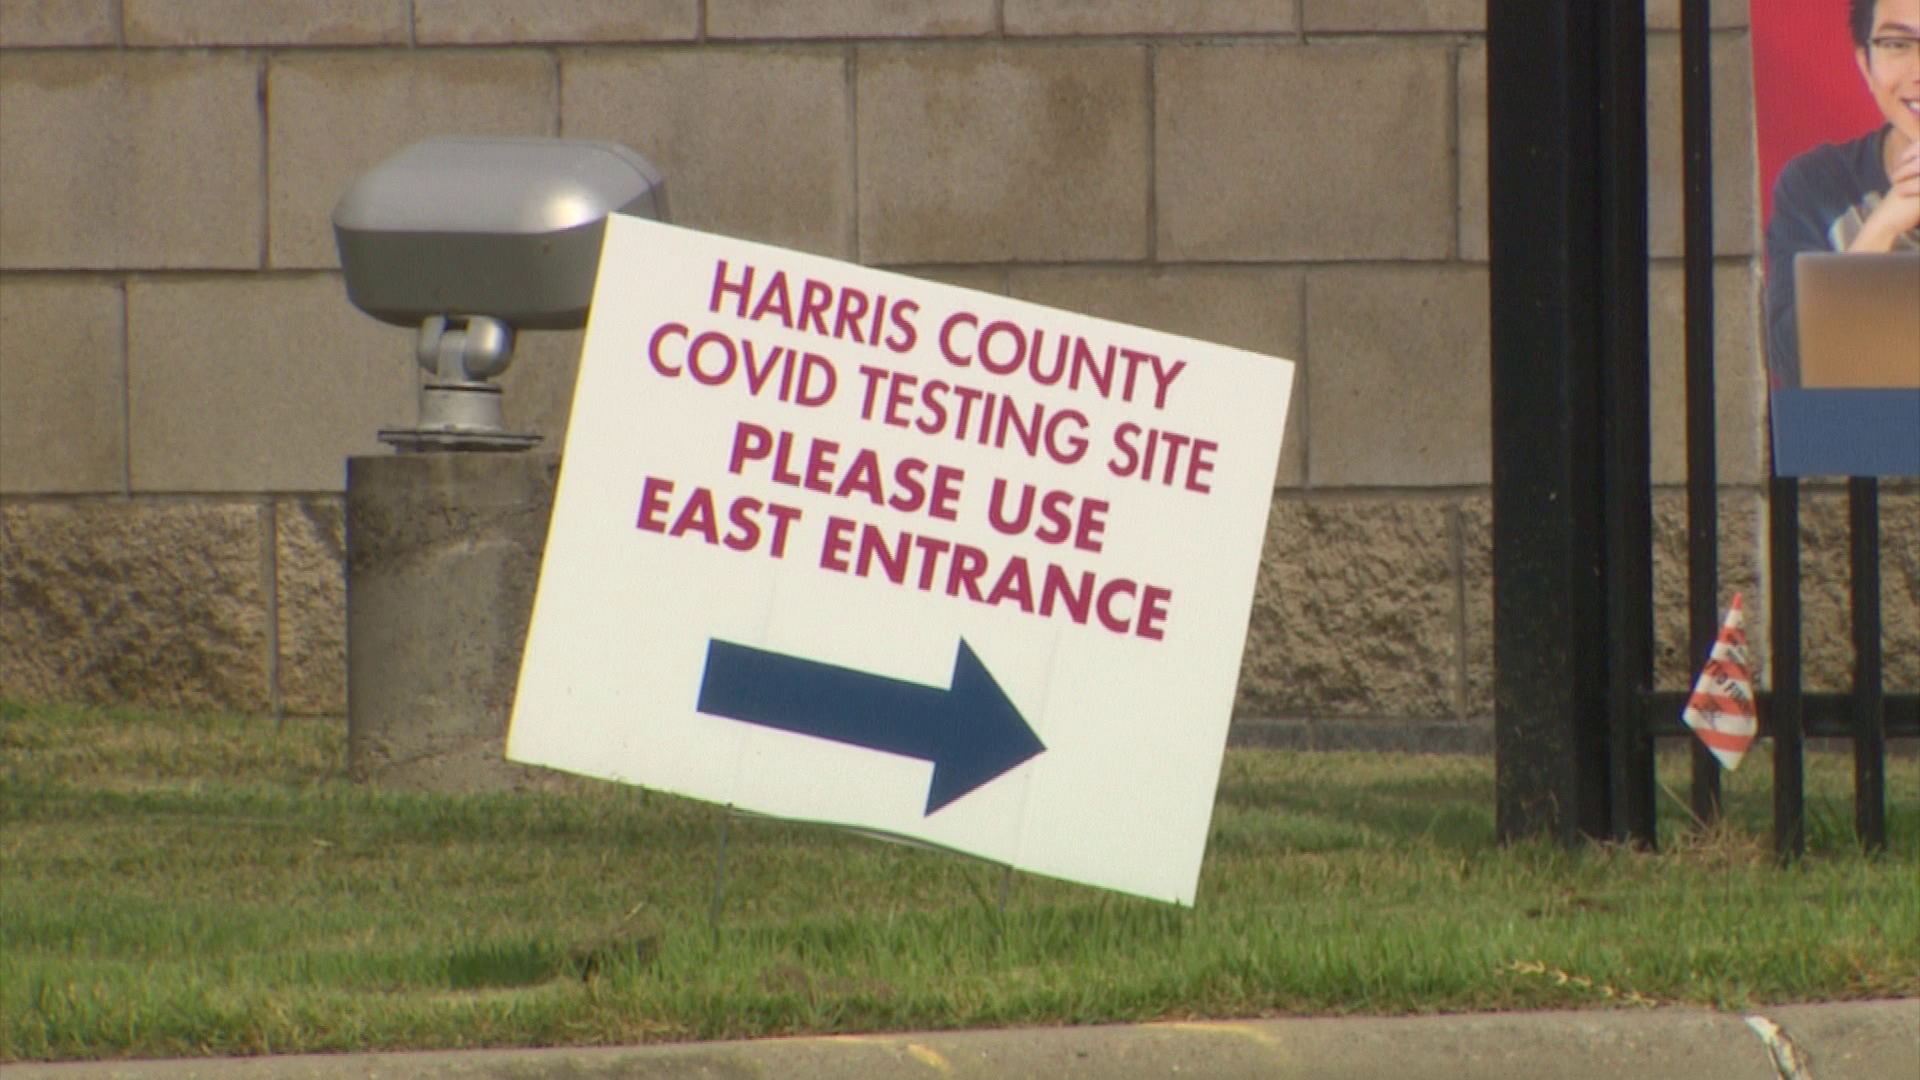 Health officials expect to see more demand for COVID-19 testing after Labor Day weekend.